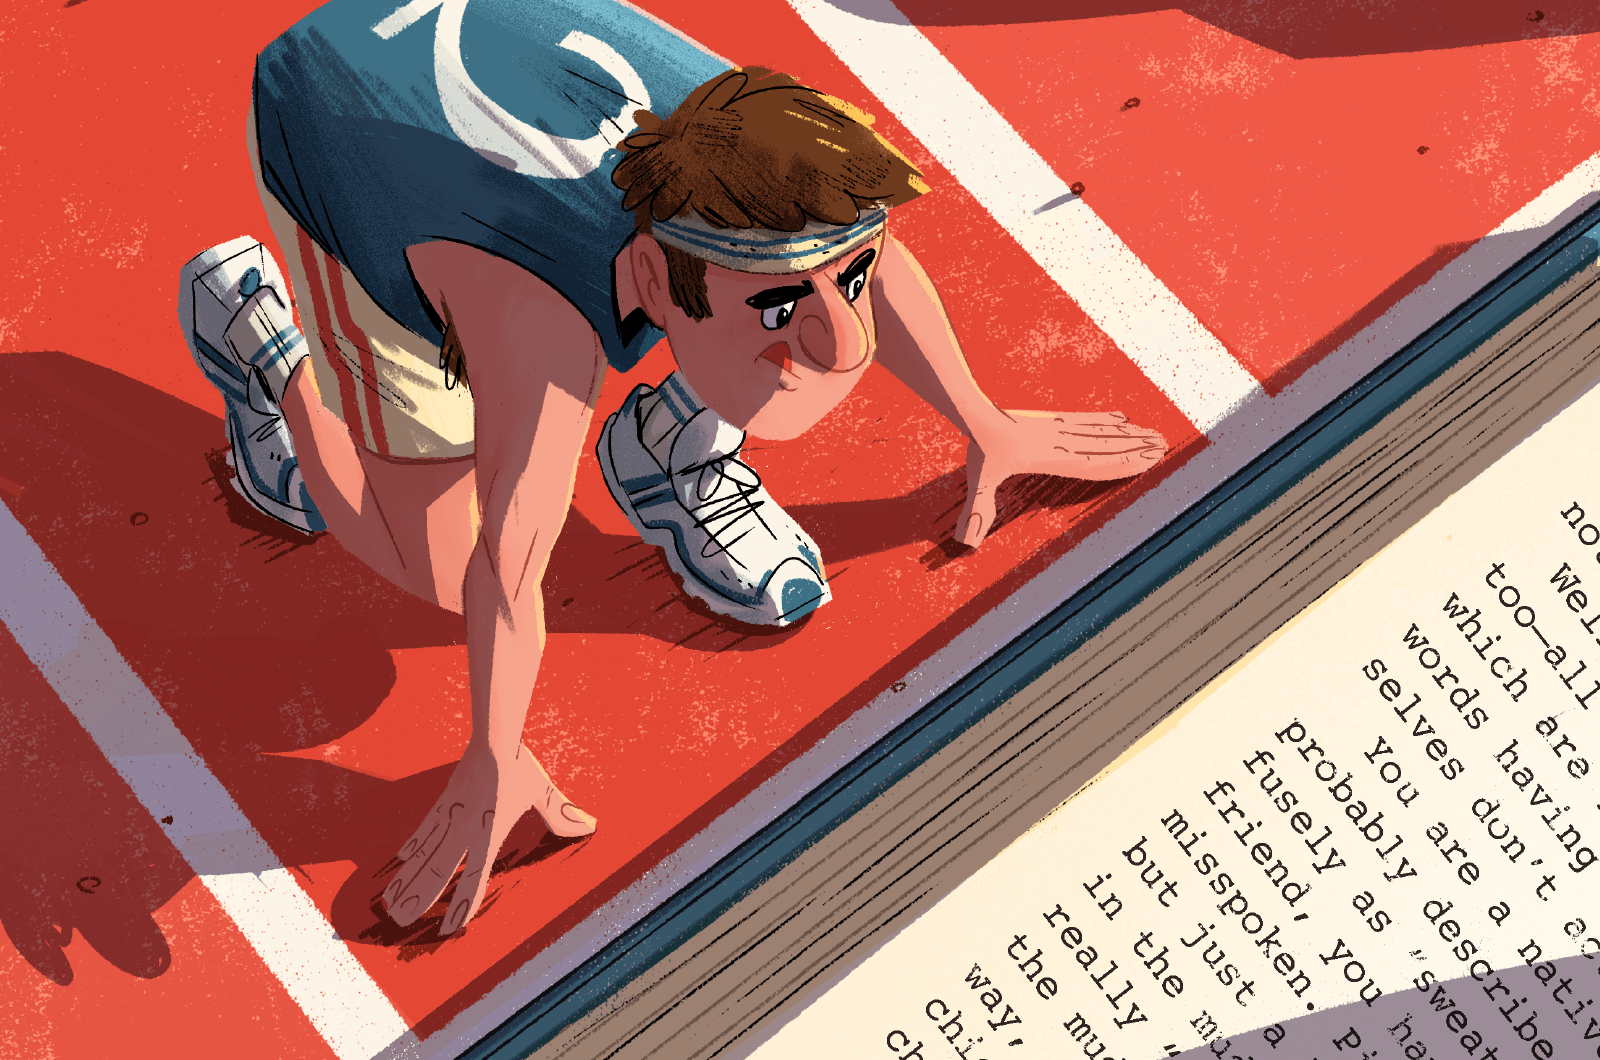 Illustration of cartoon man at starting line of race with book